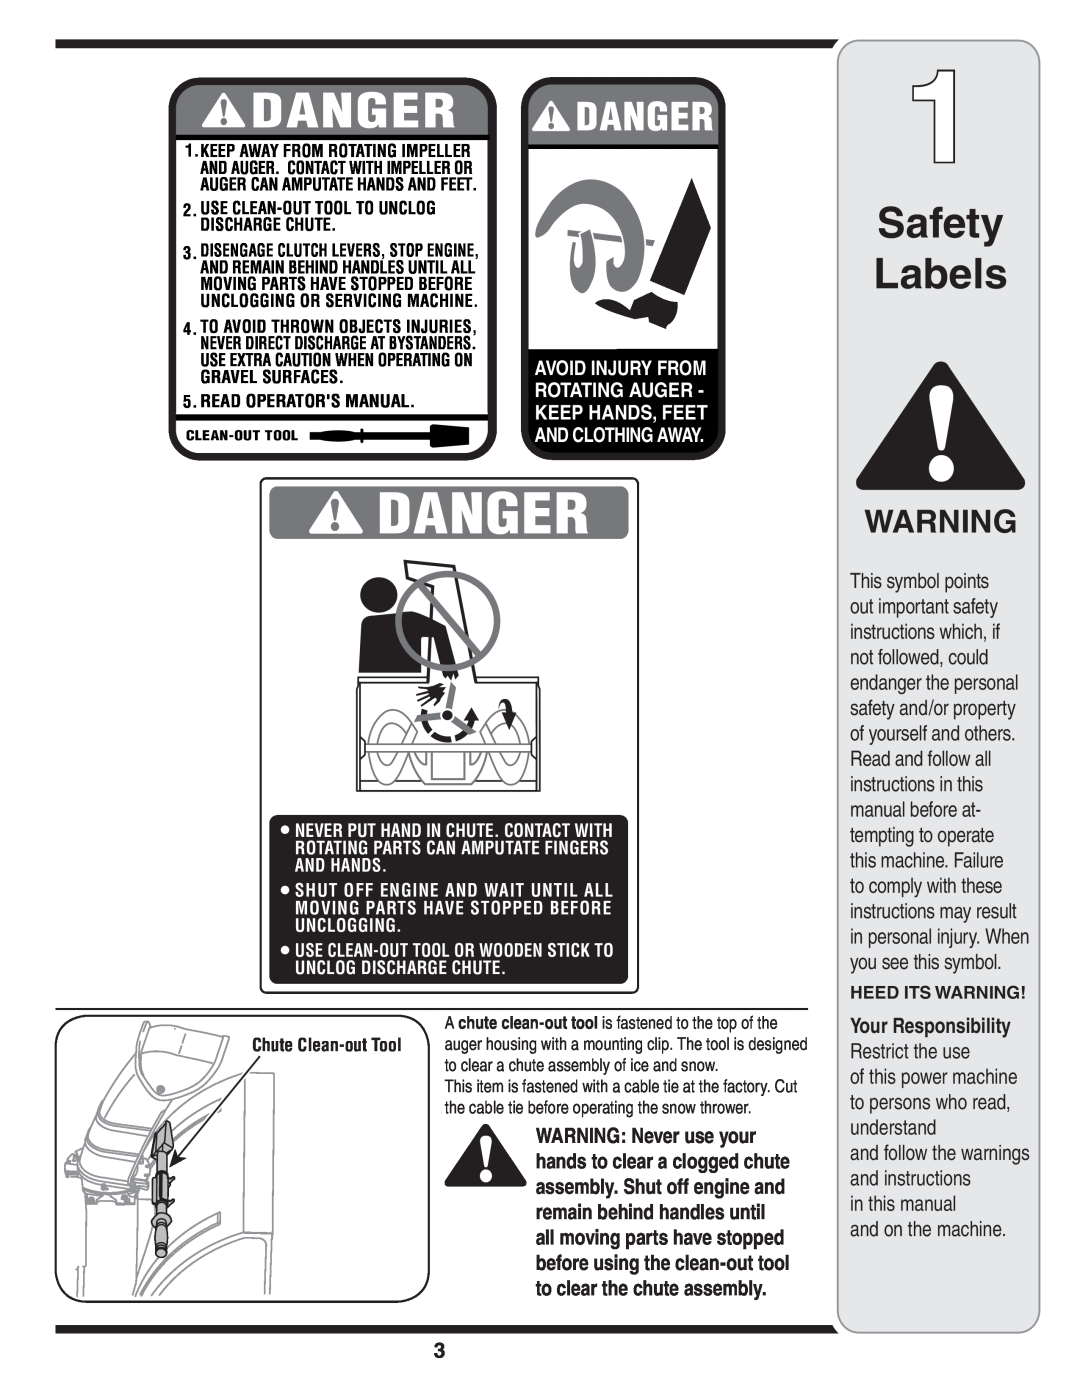 MTD C Style Safety Labels, Restrict the use, in this manual and on the machine, Your Responsibility, Heed Its Warning 